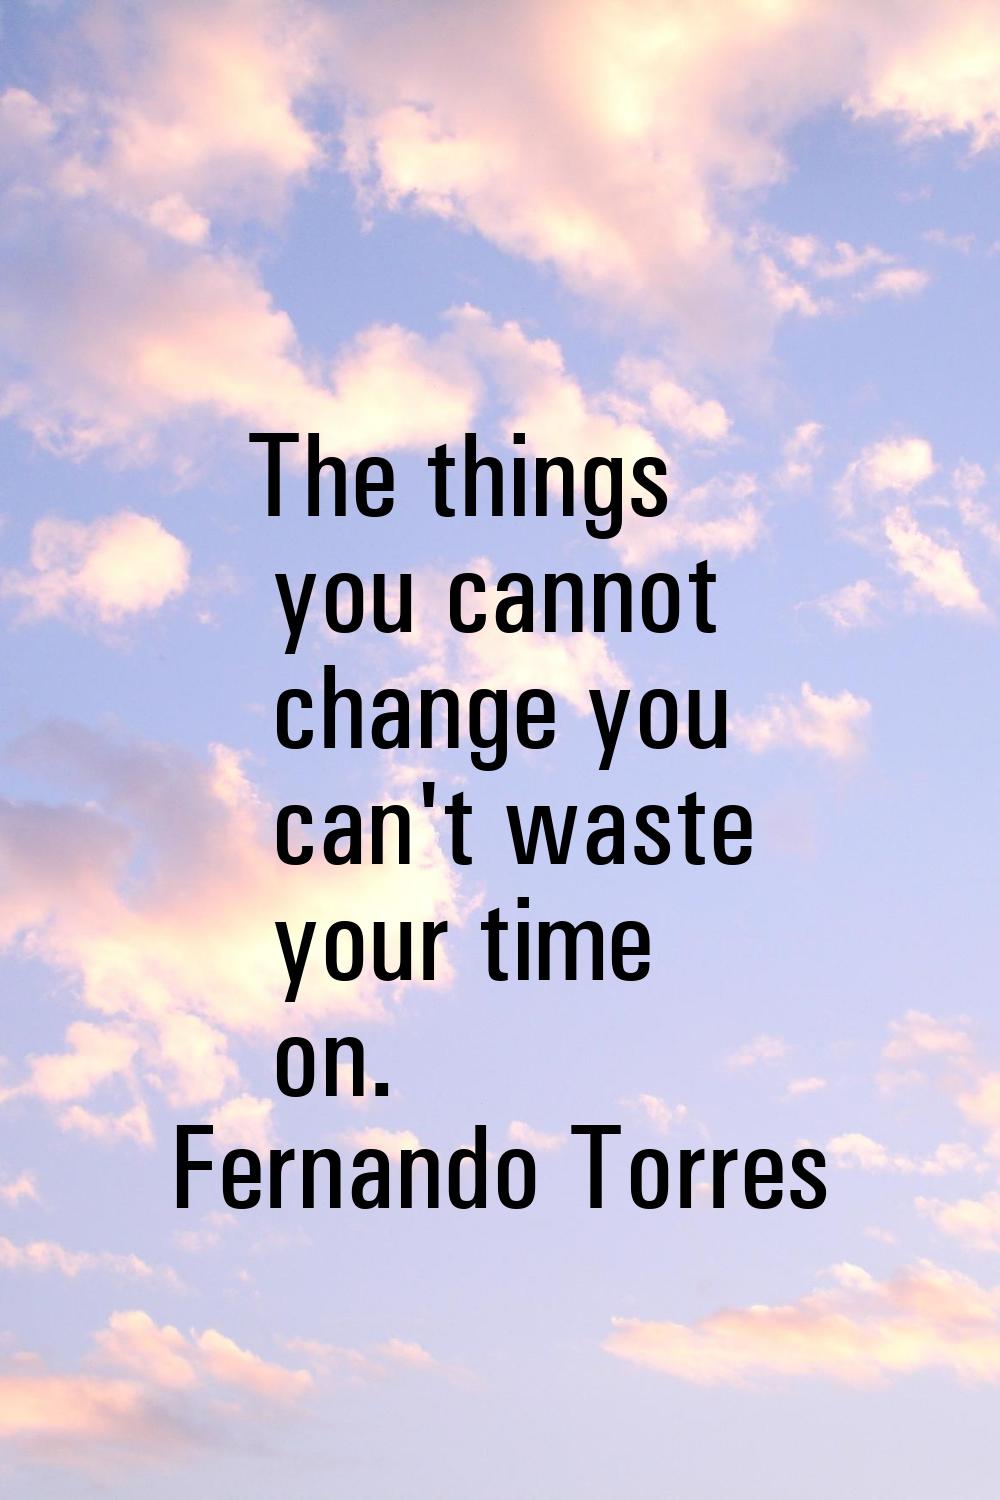 The things you cannot change you can't waste your time on.